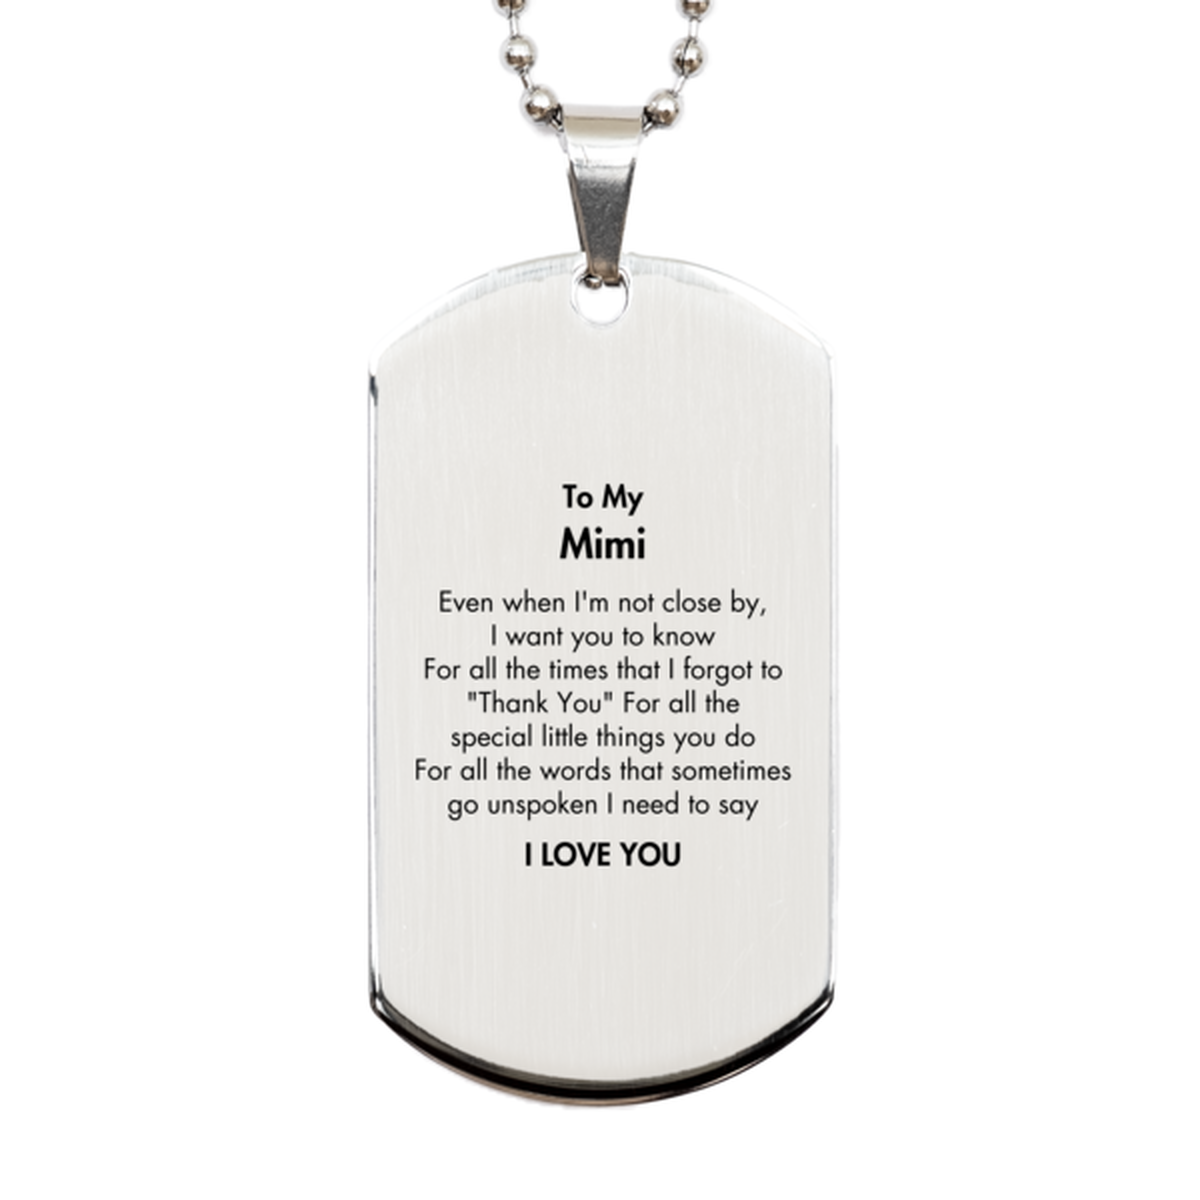 Thank You Gifts for Mimi, Keepsake Silver Dog Tag Gifts for Mimi Birthday Mother's day Father's Day Mimi For all the words That sometimes go unspoken I need to say I LOVE YOU